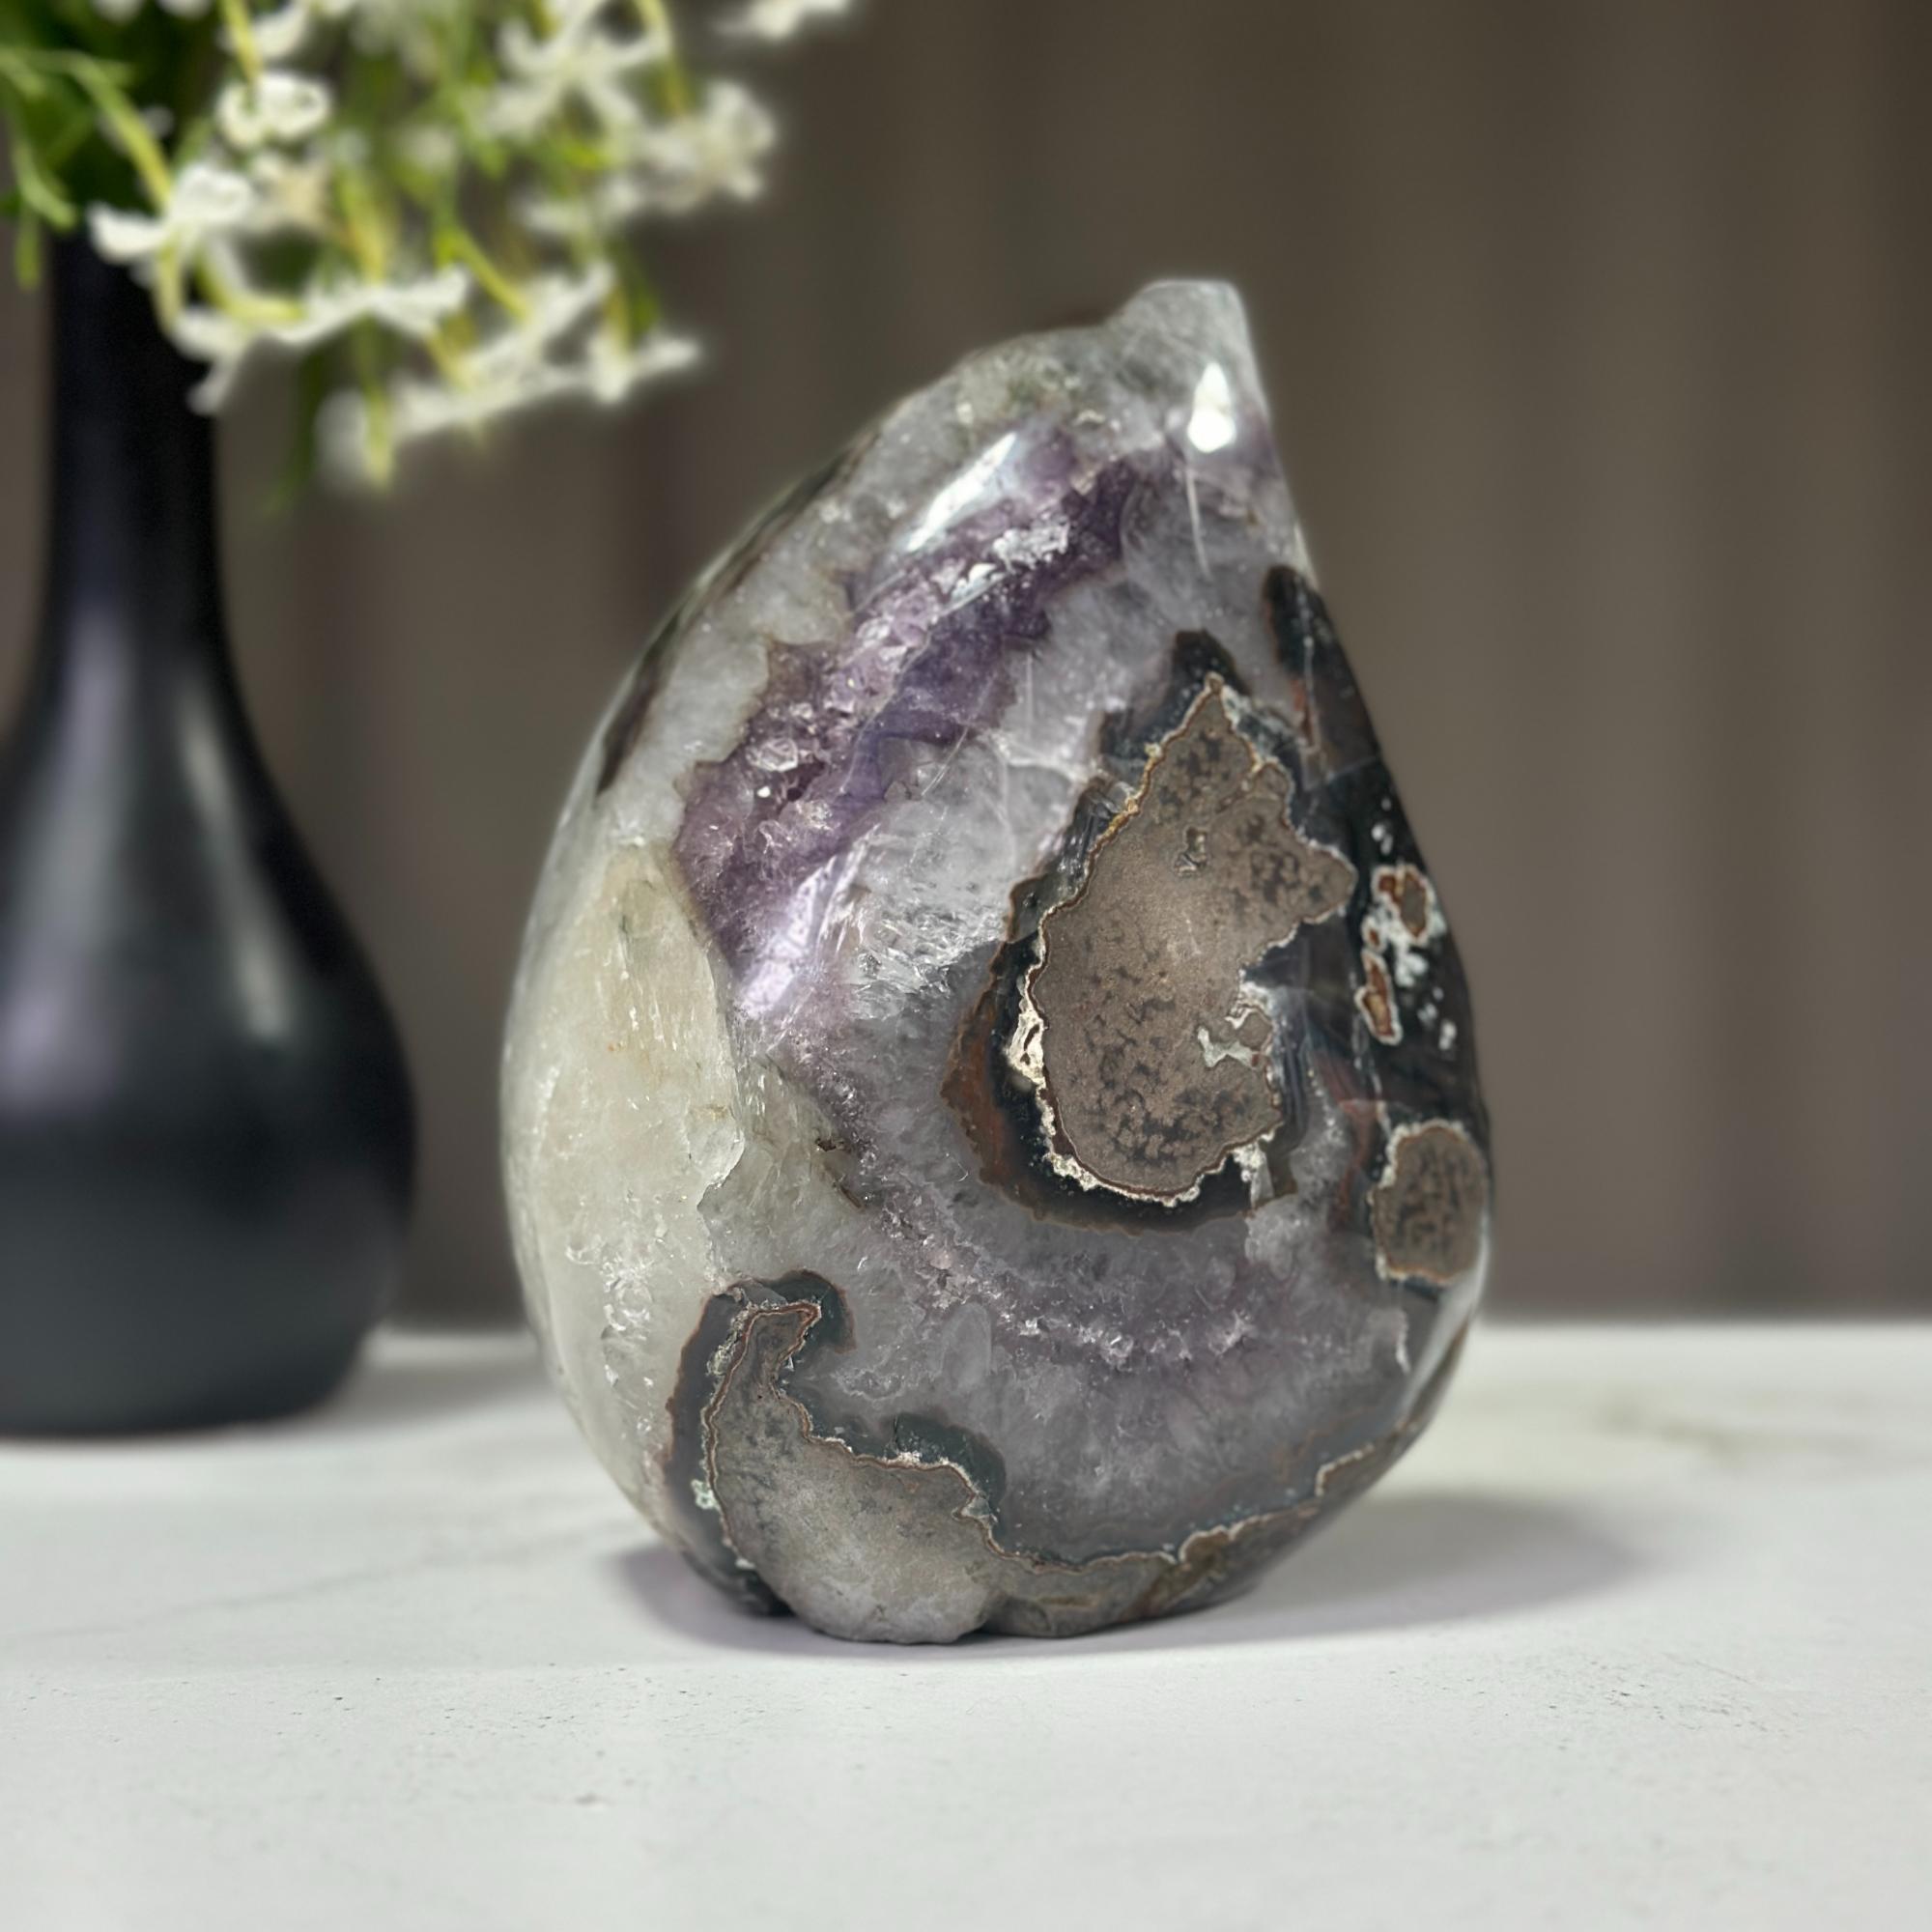 Amethyst and agate Stone Flame, Healing Crystals, Unique Amethyst Flame Carving